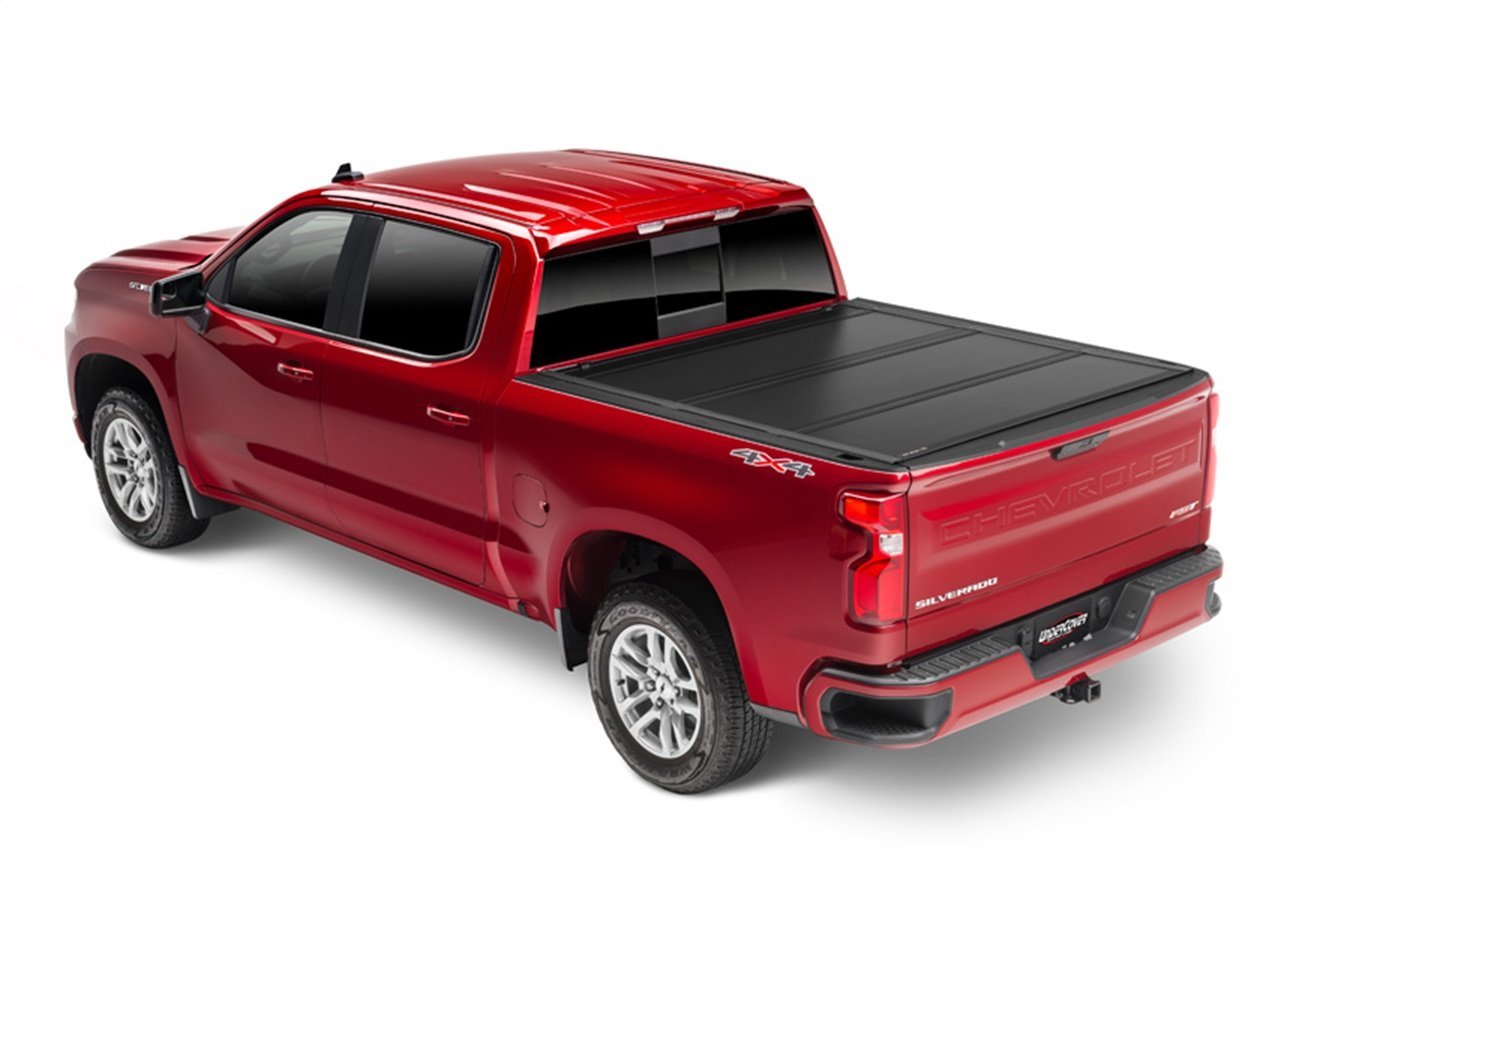 UX12029 Ultra Flex Hard Folding Cover, Fits Select Chevy Colorado/GMC Canyon 5'2" Bed Crew, Matte Black Finish